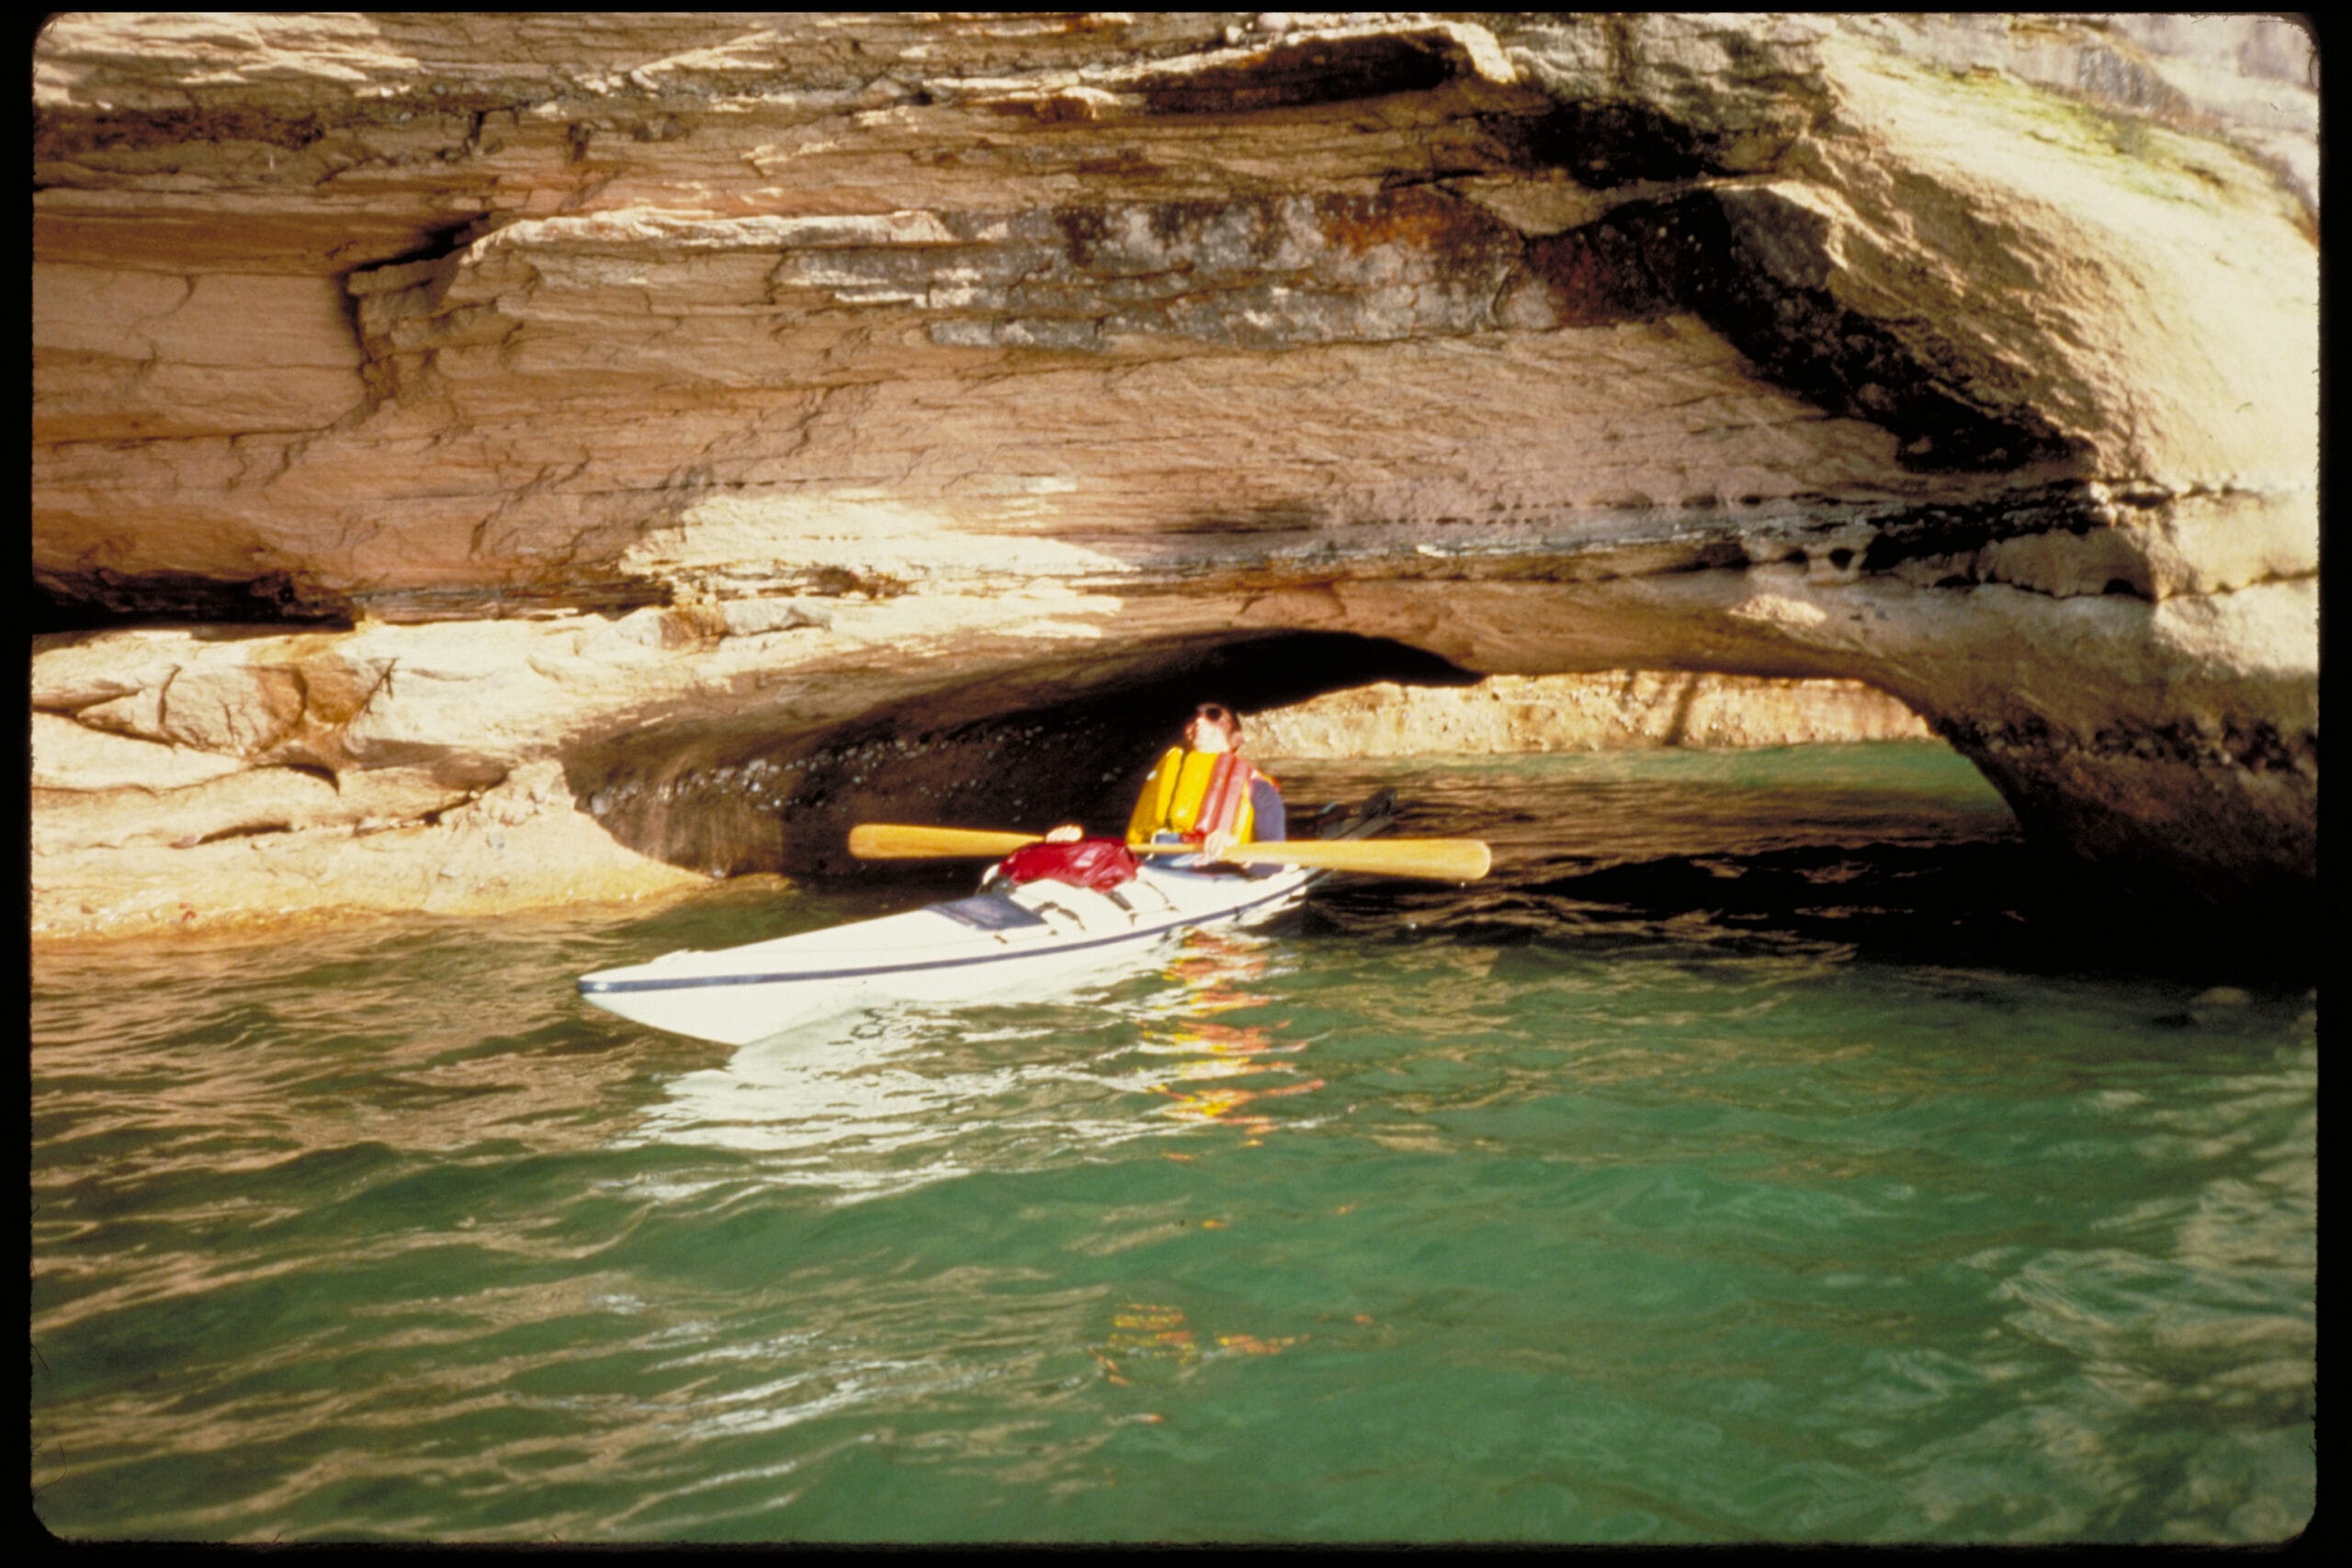 A person is kayaking through a cave.